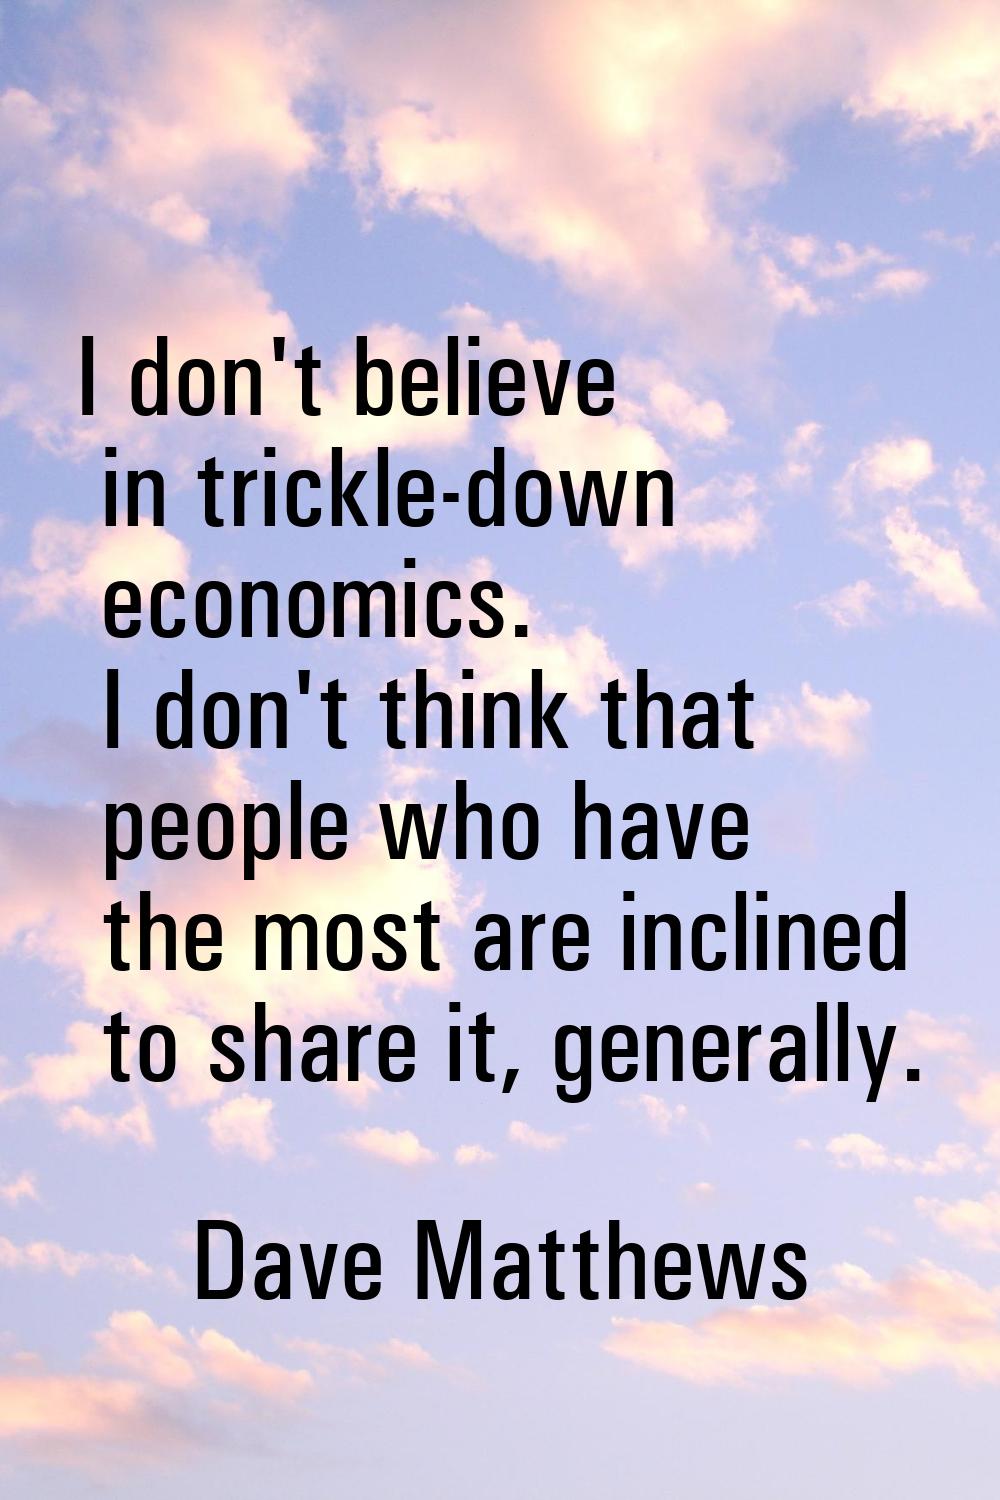 I don't believe in trickle-down economics. I don't think that people who have the most are inclined